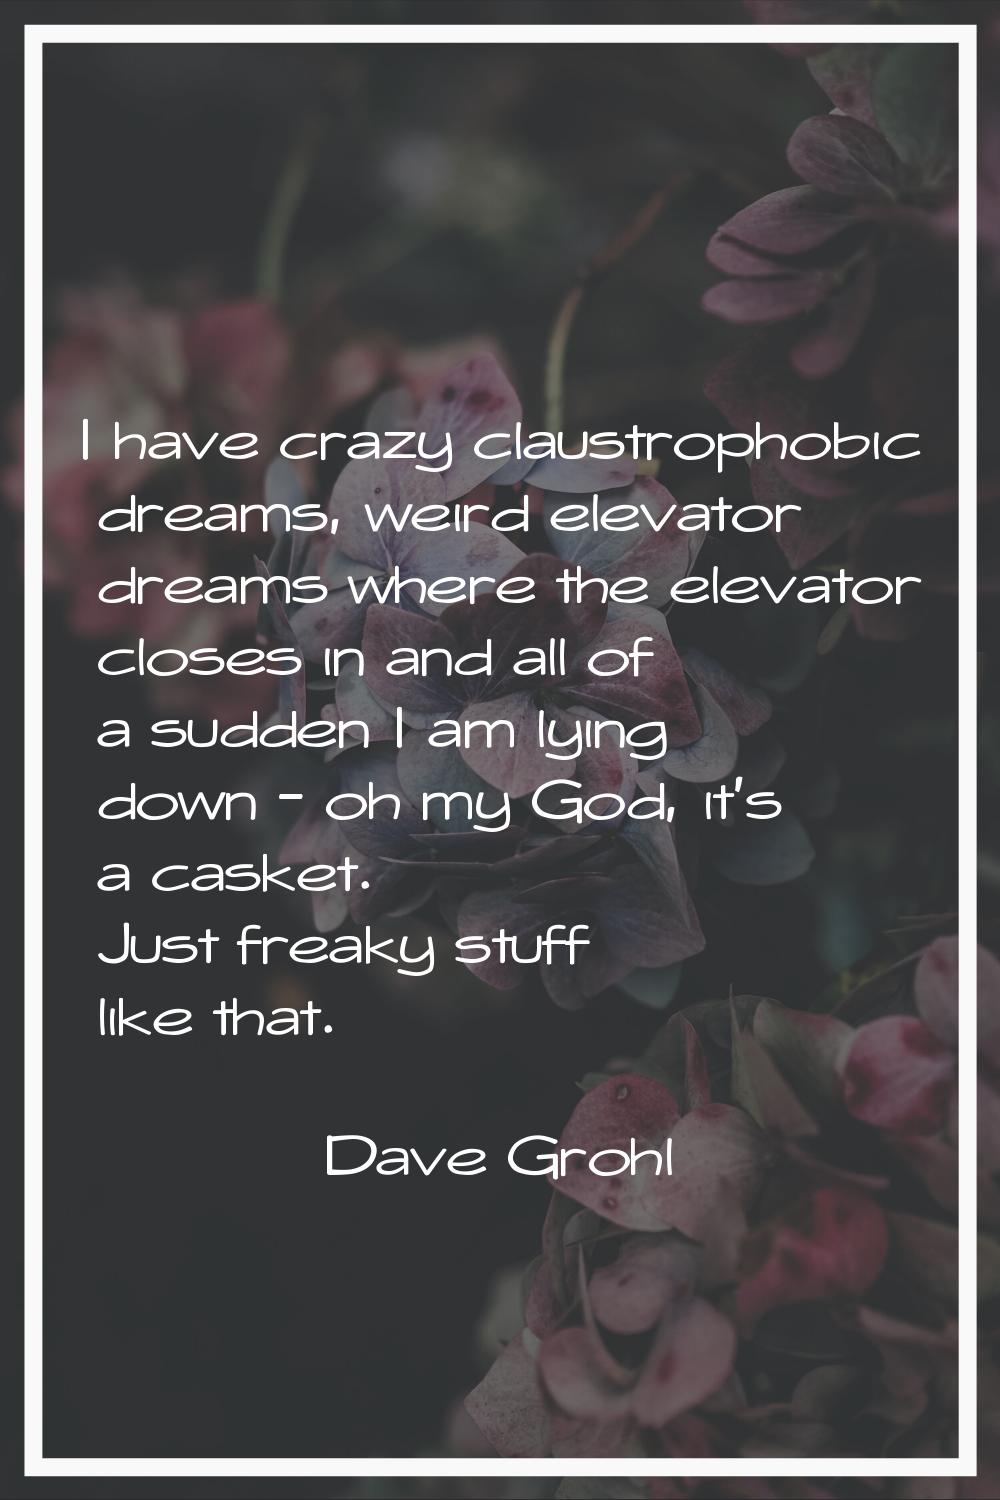 I have crazy claustrophobic dreams, weird elevator dreams where the elevator closes in and all of a